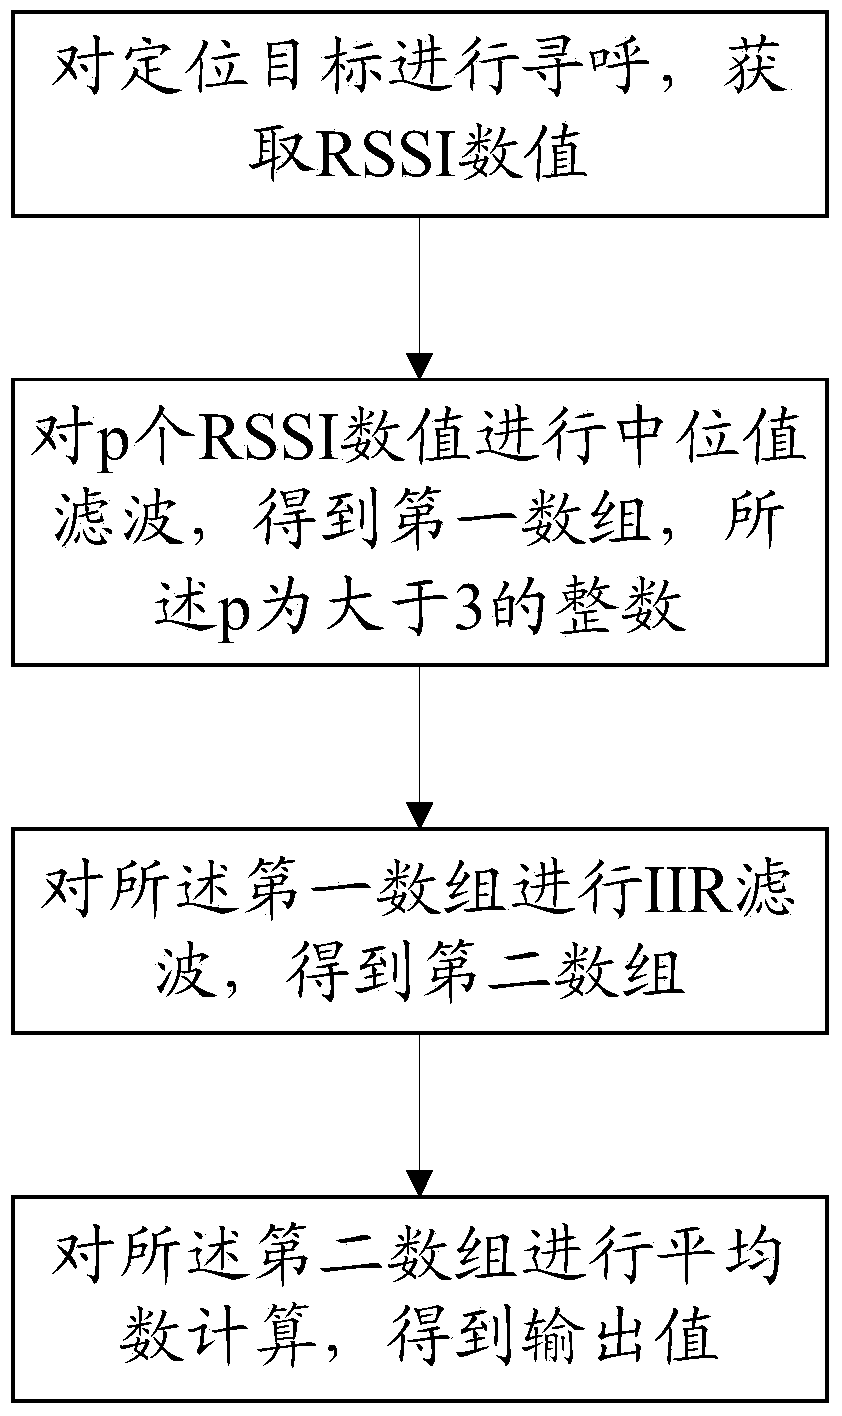 Filtering method and system based on rssi